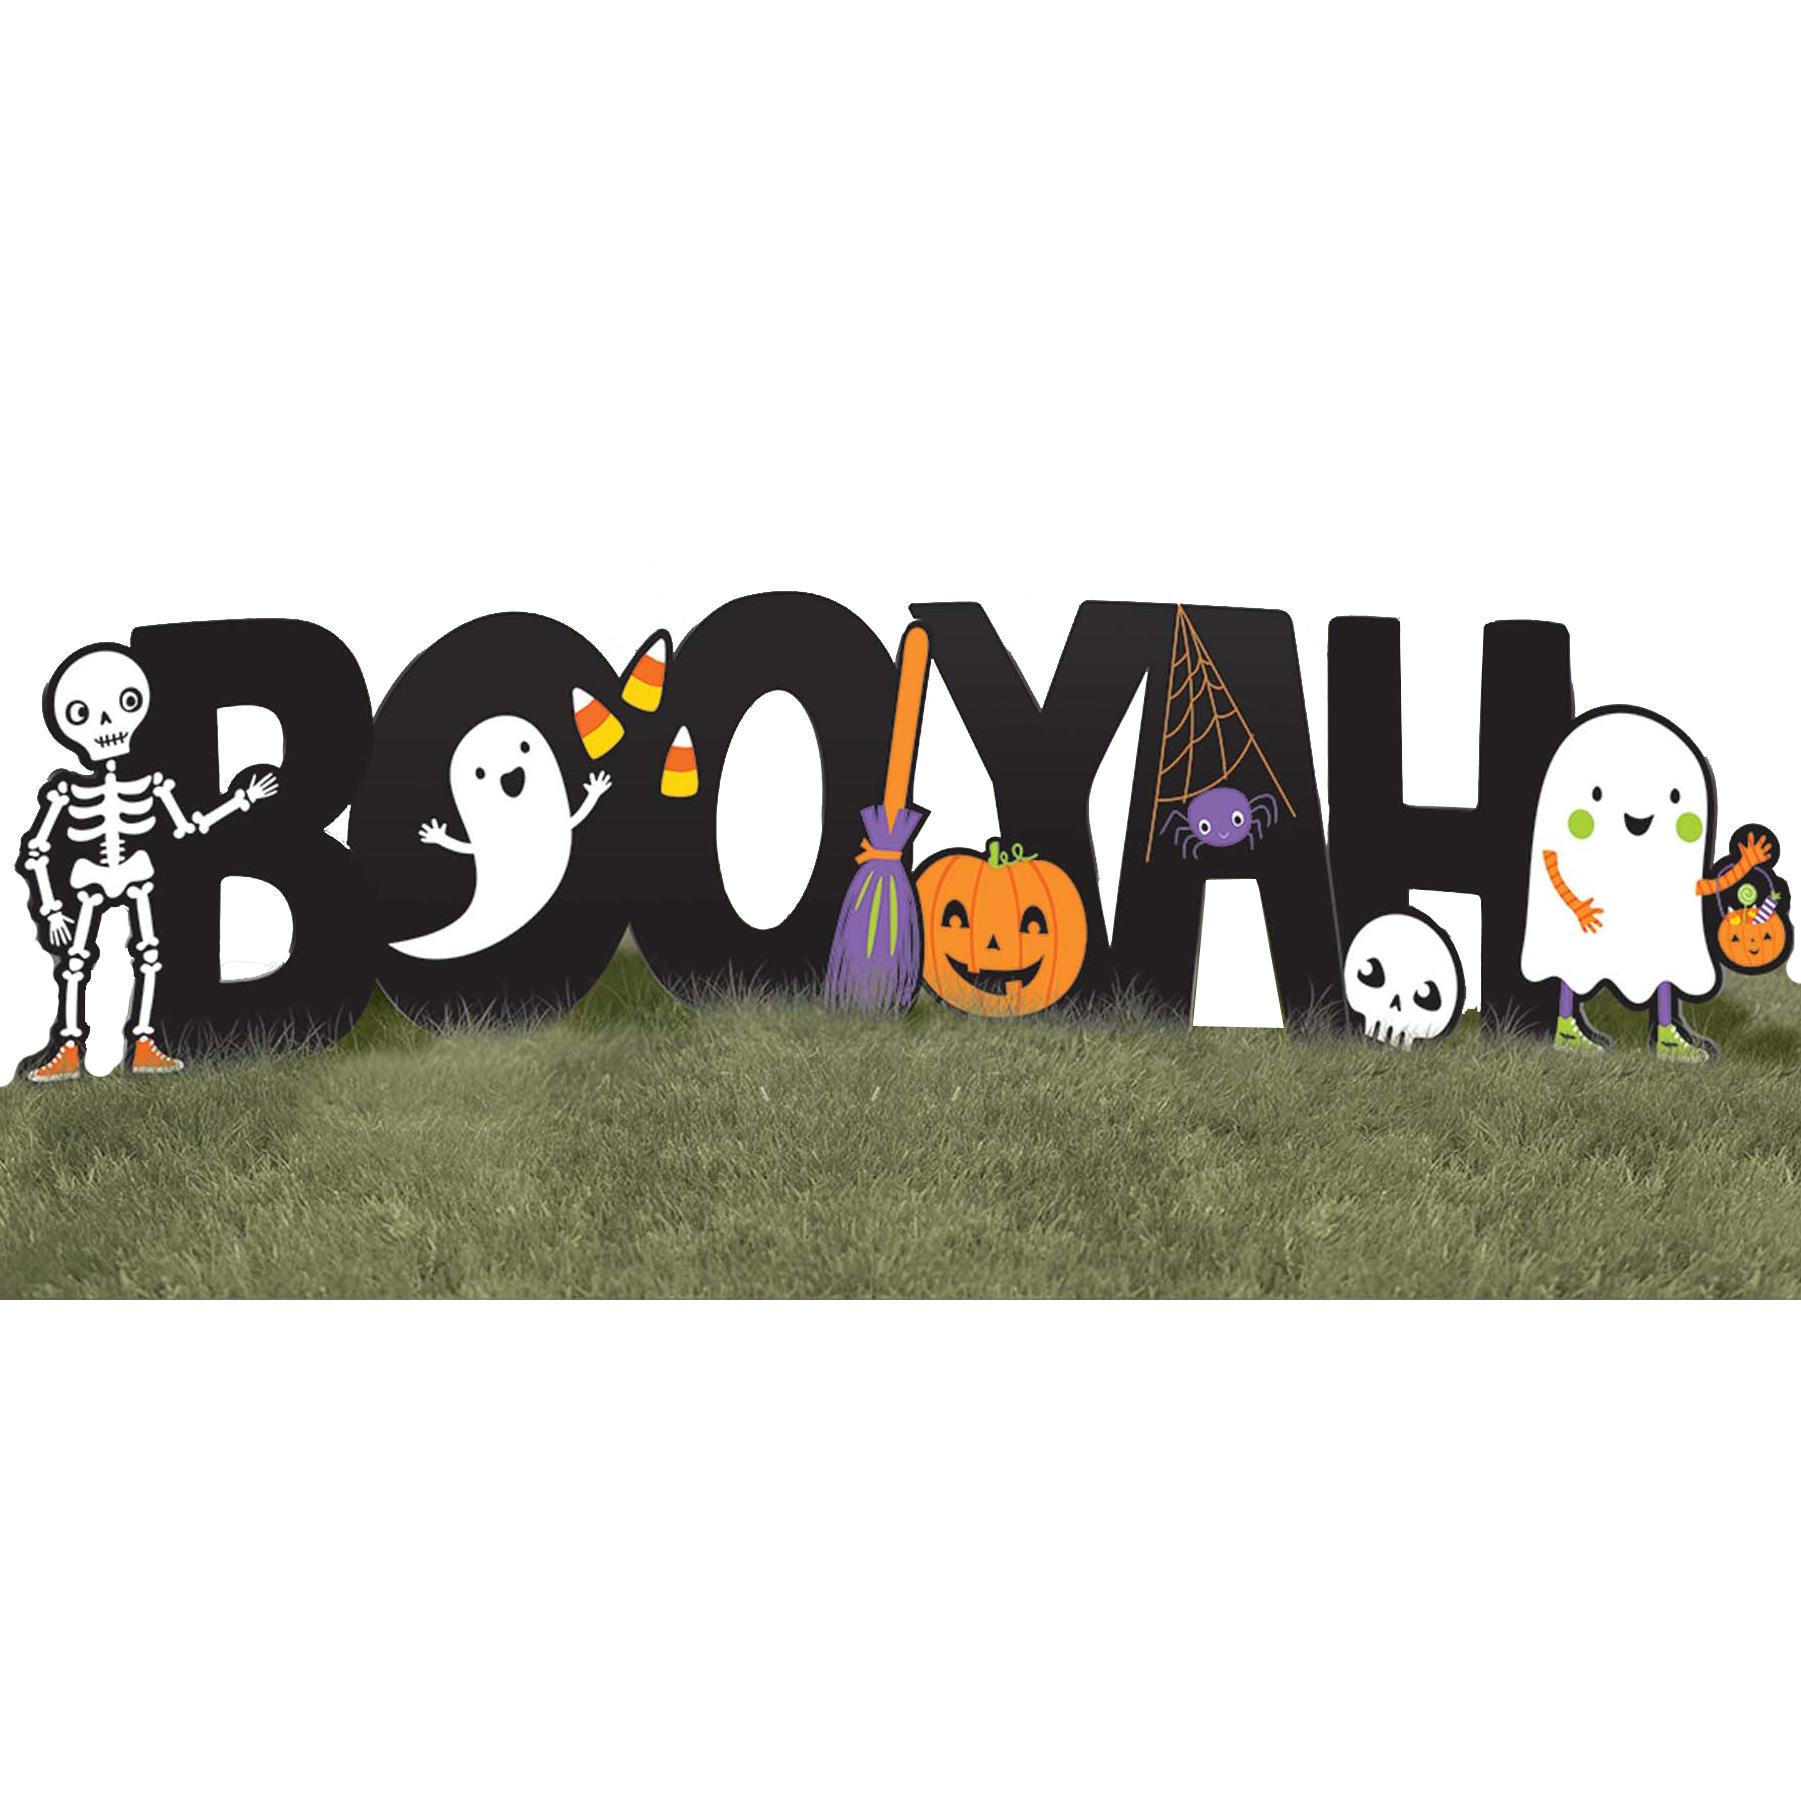 Halloween Boo-Yah! Corrugate & Plastic Yard Sign Decorations - Party Centre - Party Centre